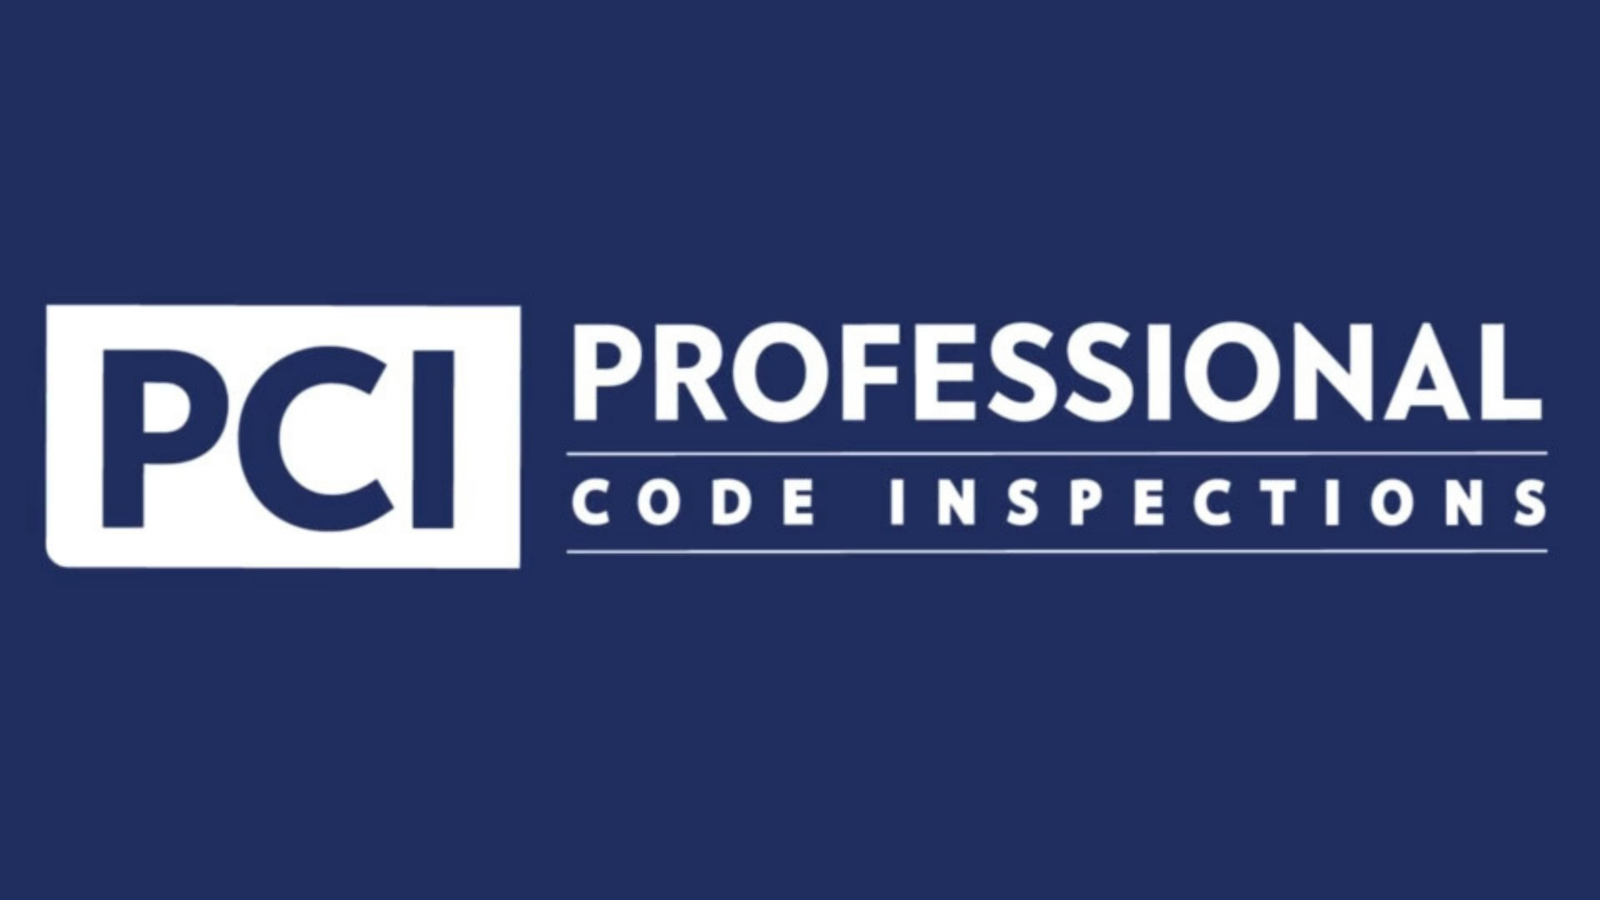 PCI Professional Code Inspections